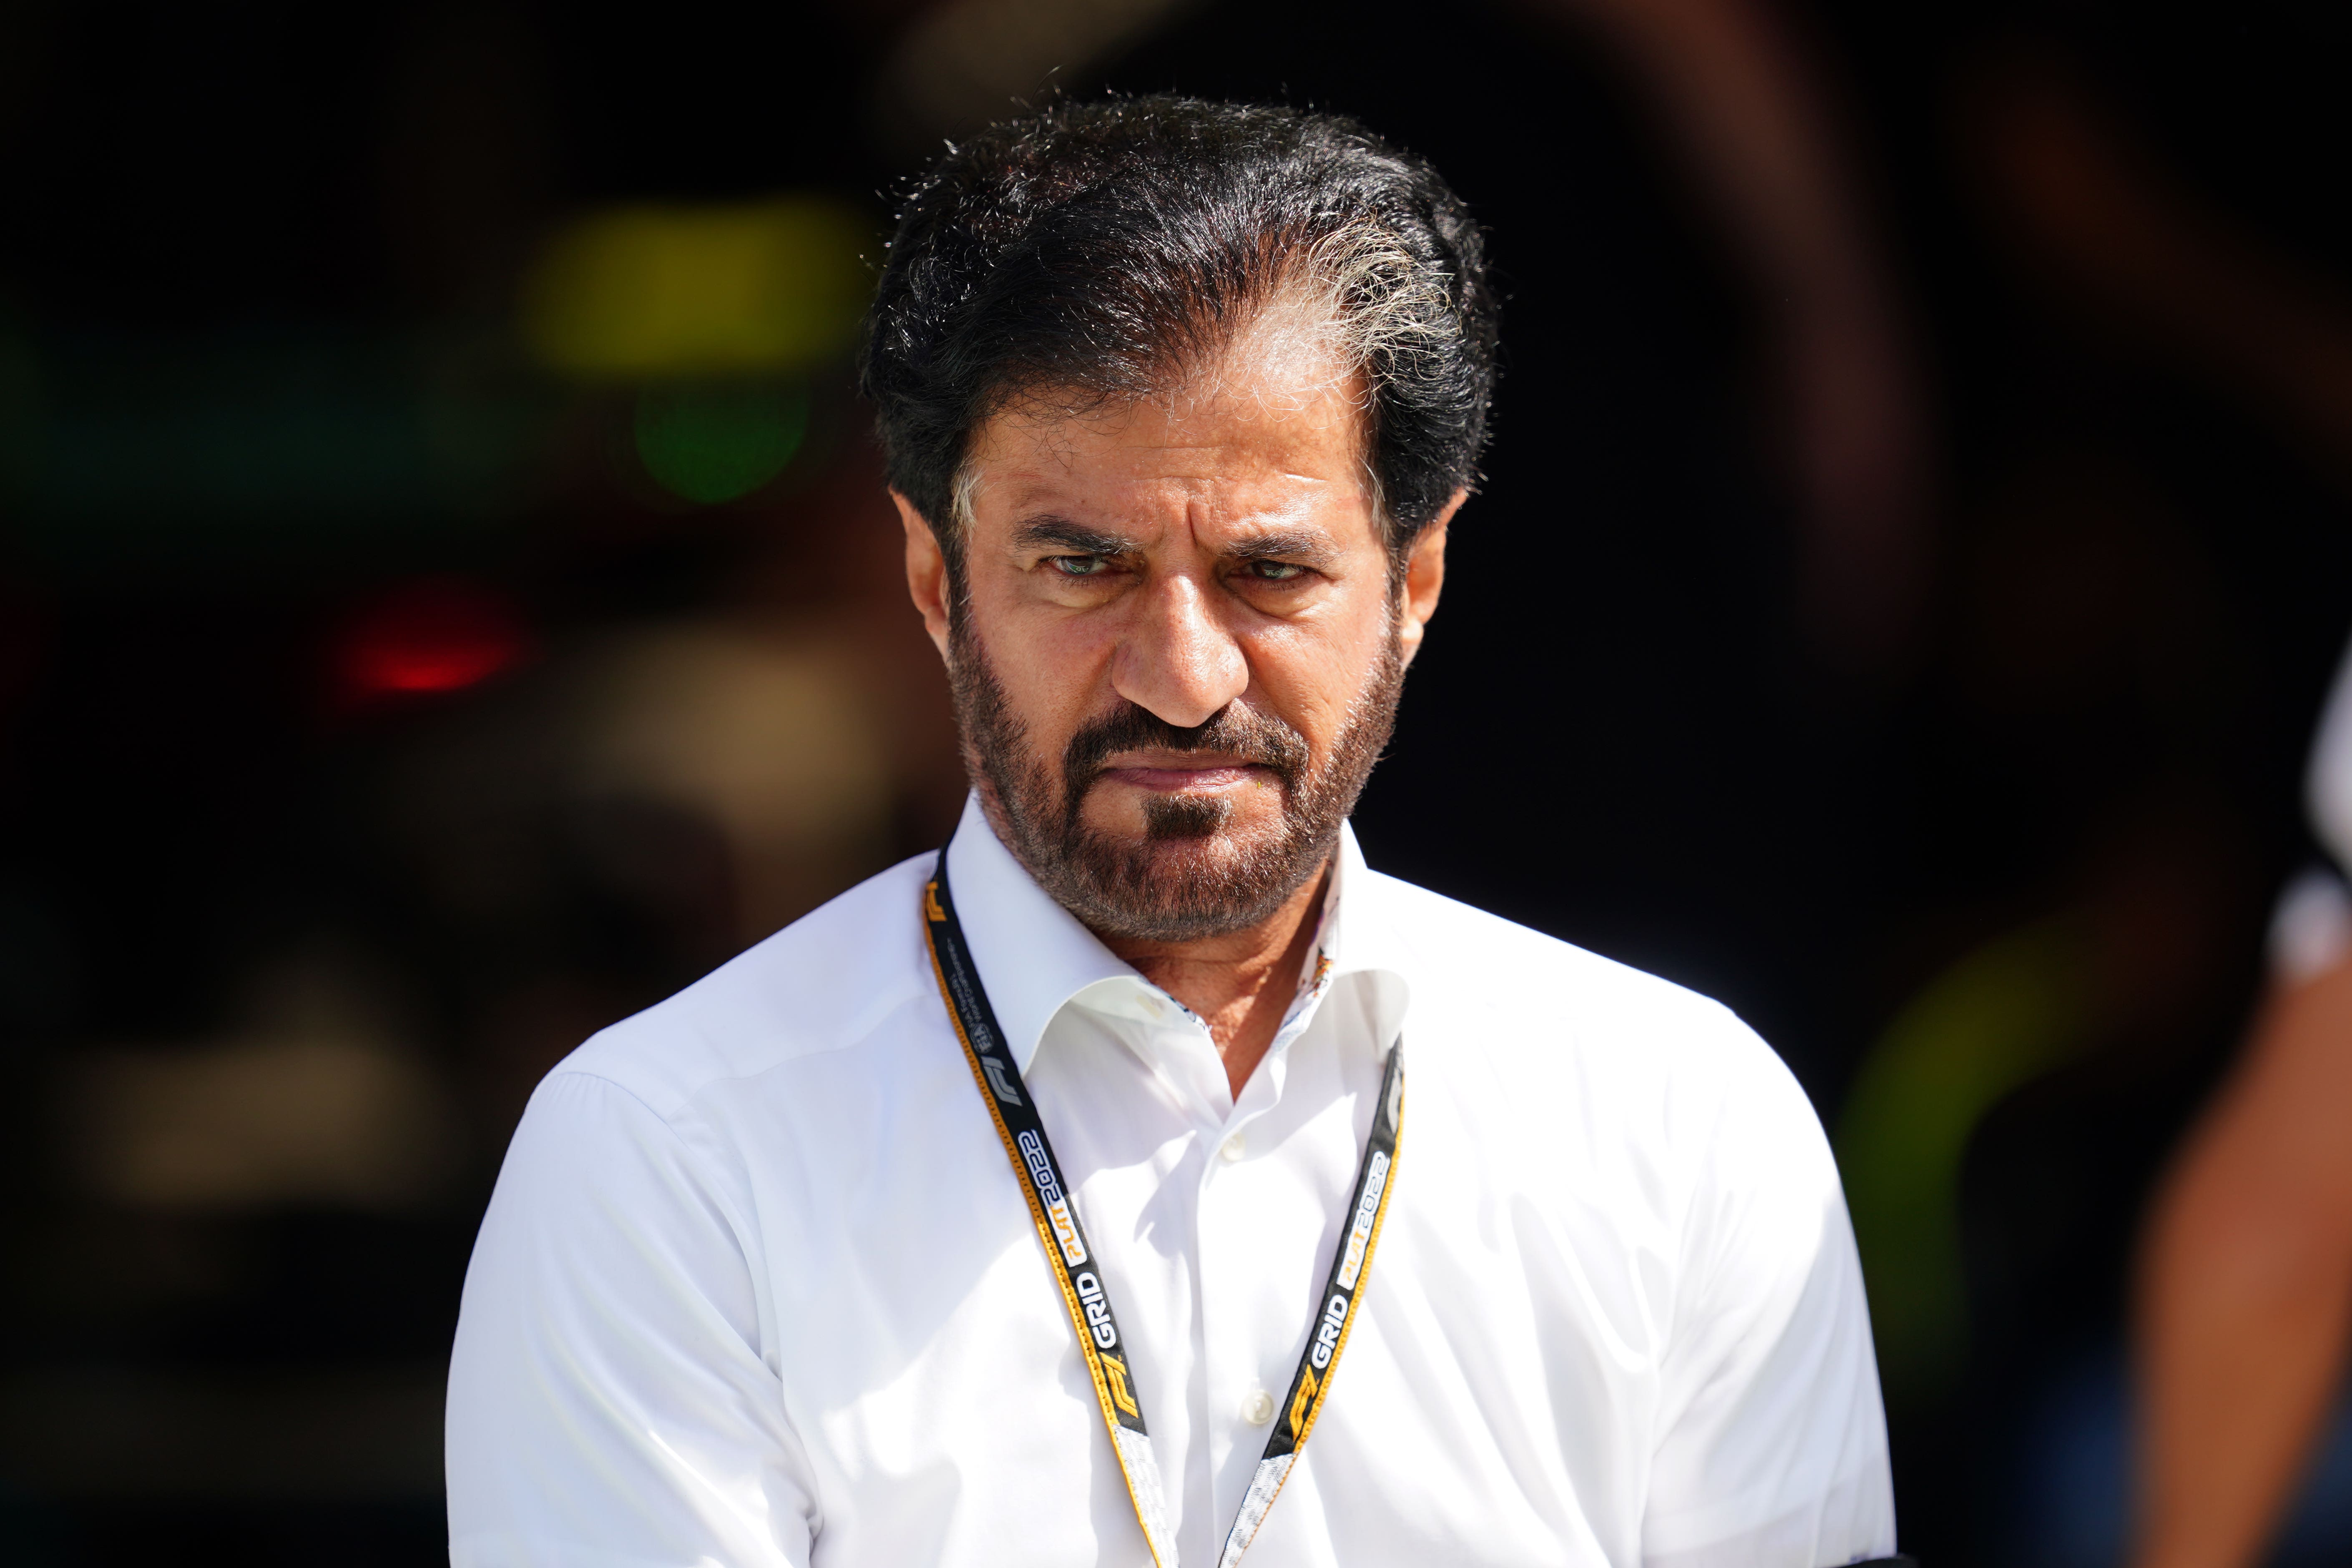 FIA boss Mohammed Ben Sulayem has been directly criticised by a House of Lords peer